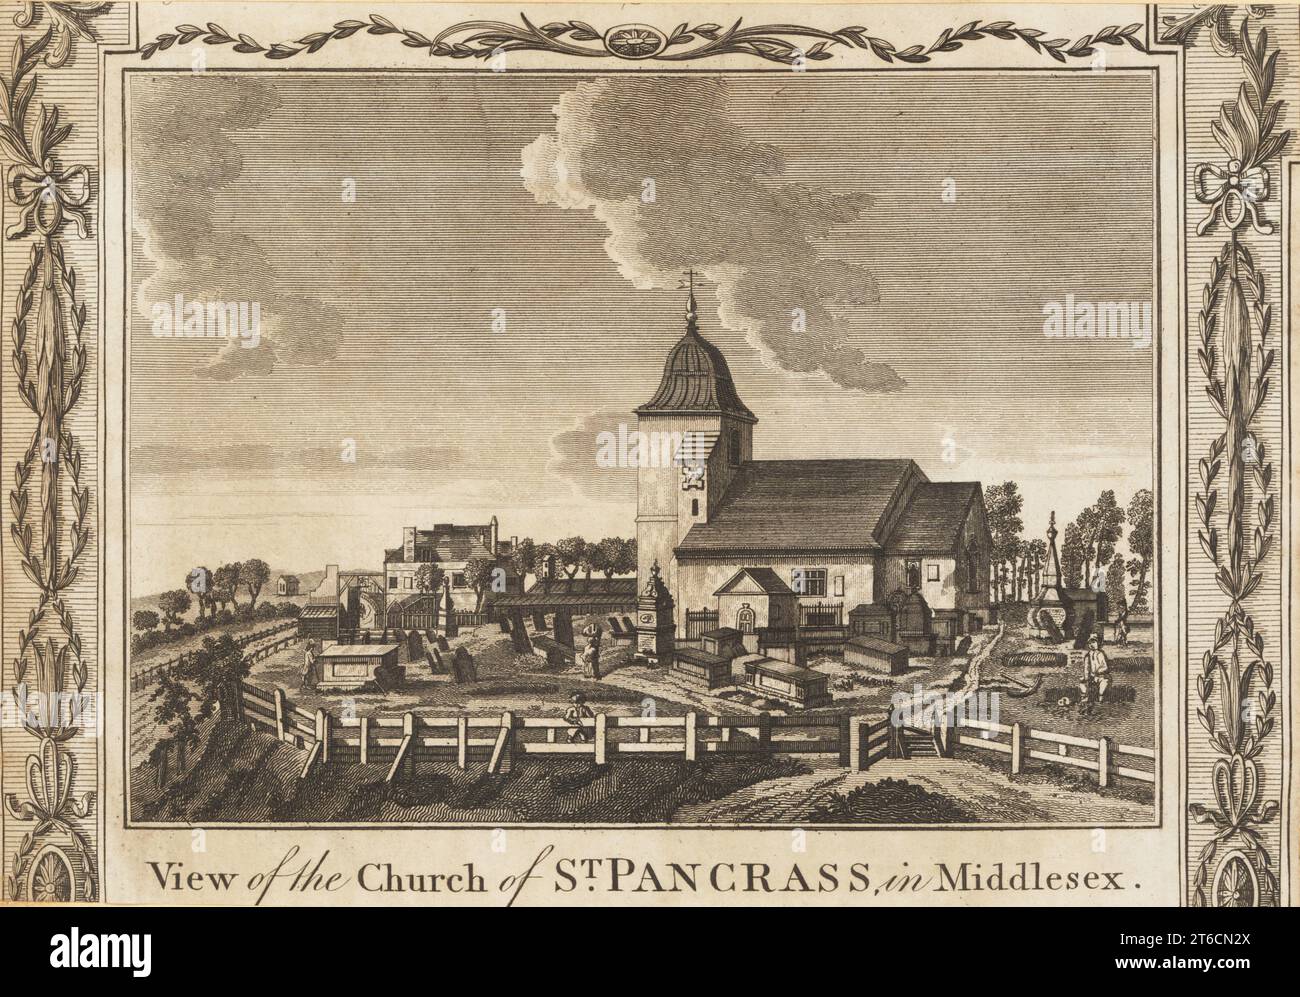 St Pancras Old Church, central London, 18th century. Norman church rebuilt in the Late Tudor era with tower, nave, chancel and porch. Graveyard with headstones. View of the church of St. Pancrass in Middlesex. Copperplate engraving by Lodge from William Thorntons New, Complete and Universal History of the City of London, Alexander Hogg, King's Arms, No. 16 Paternoster Row, London, 1784. Stock Photo